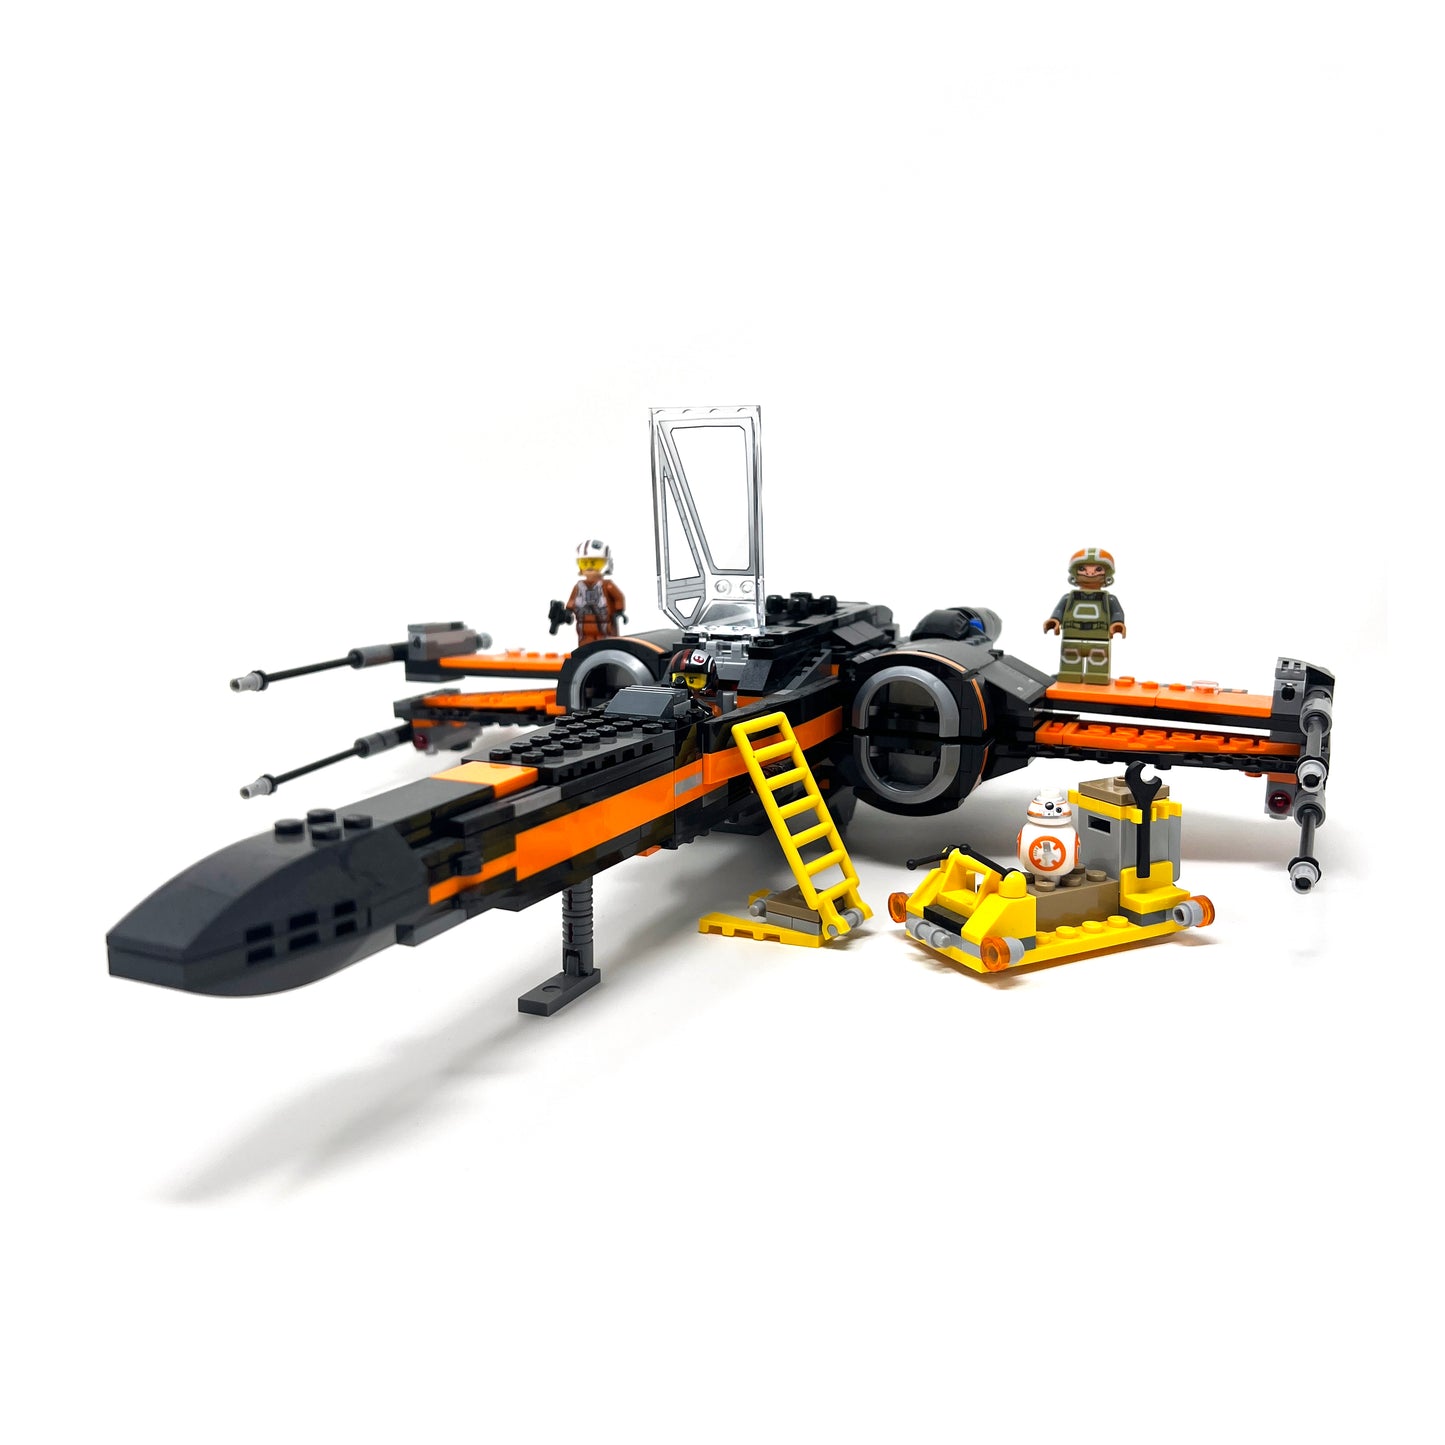 75102 Poe's X-Wing Fighter (Used)